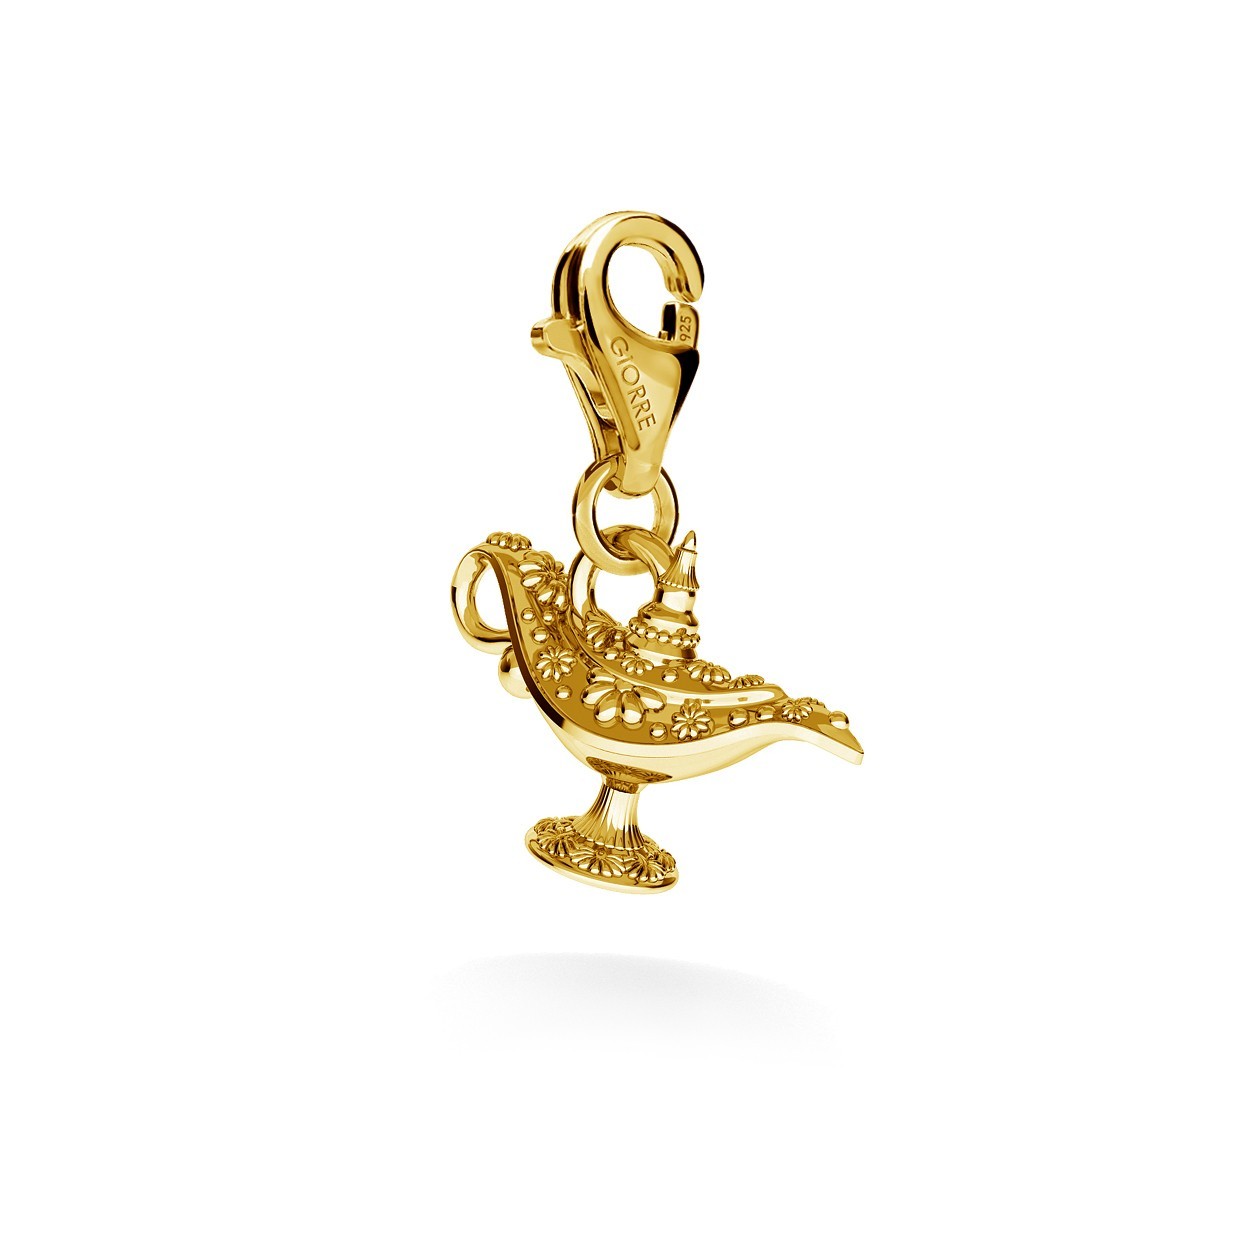 CHARM 137, ALLADIN'S LAMP, STERLING SILVER (925) RHODIUM OR GOLD PLATED